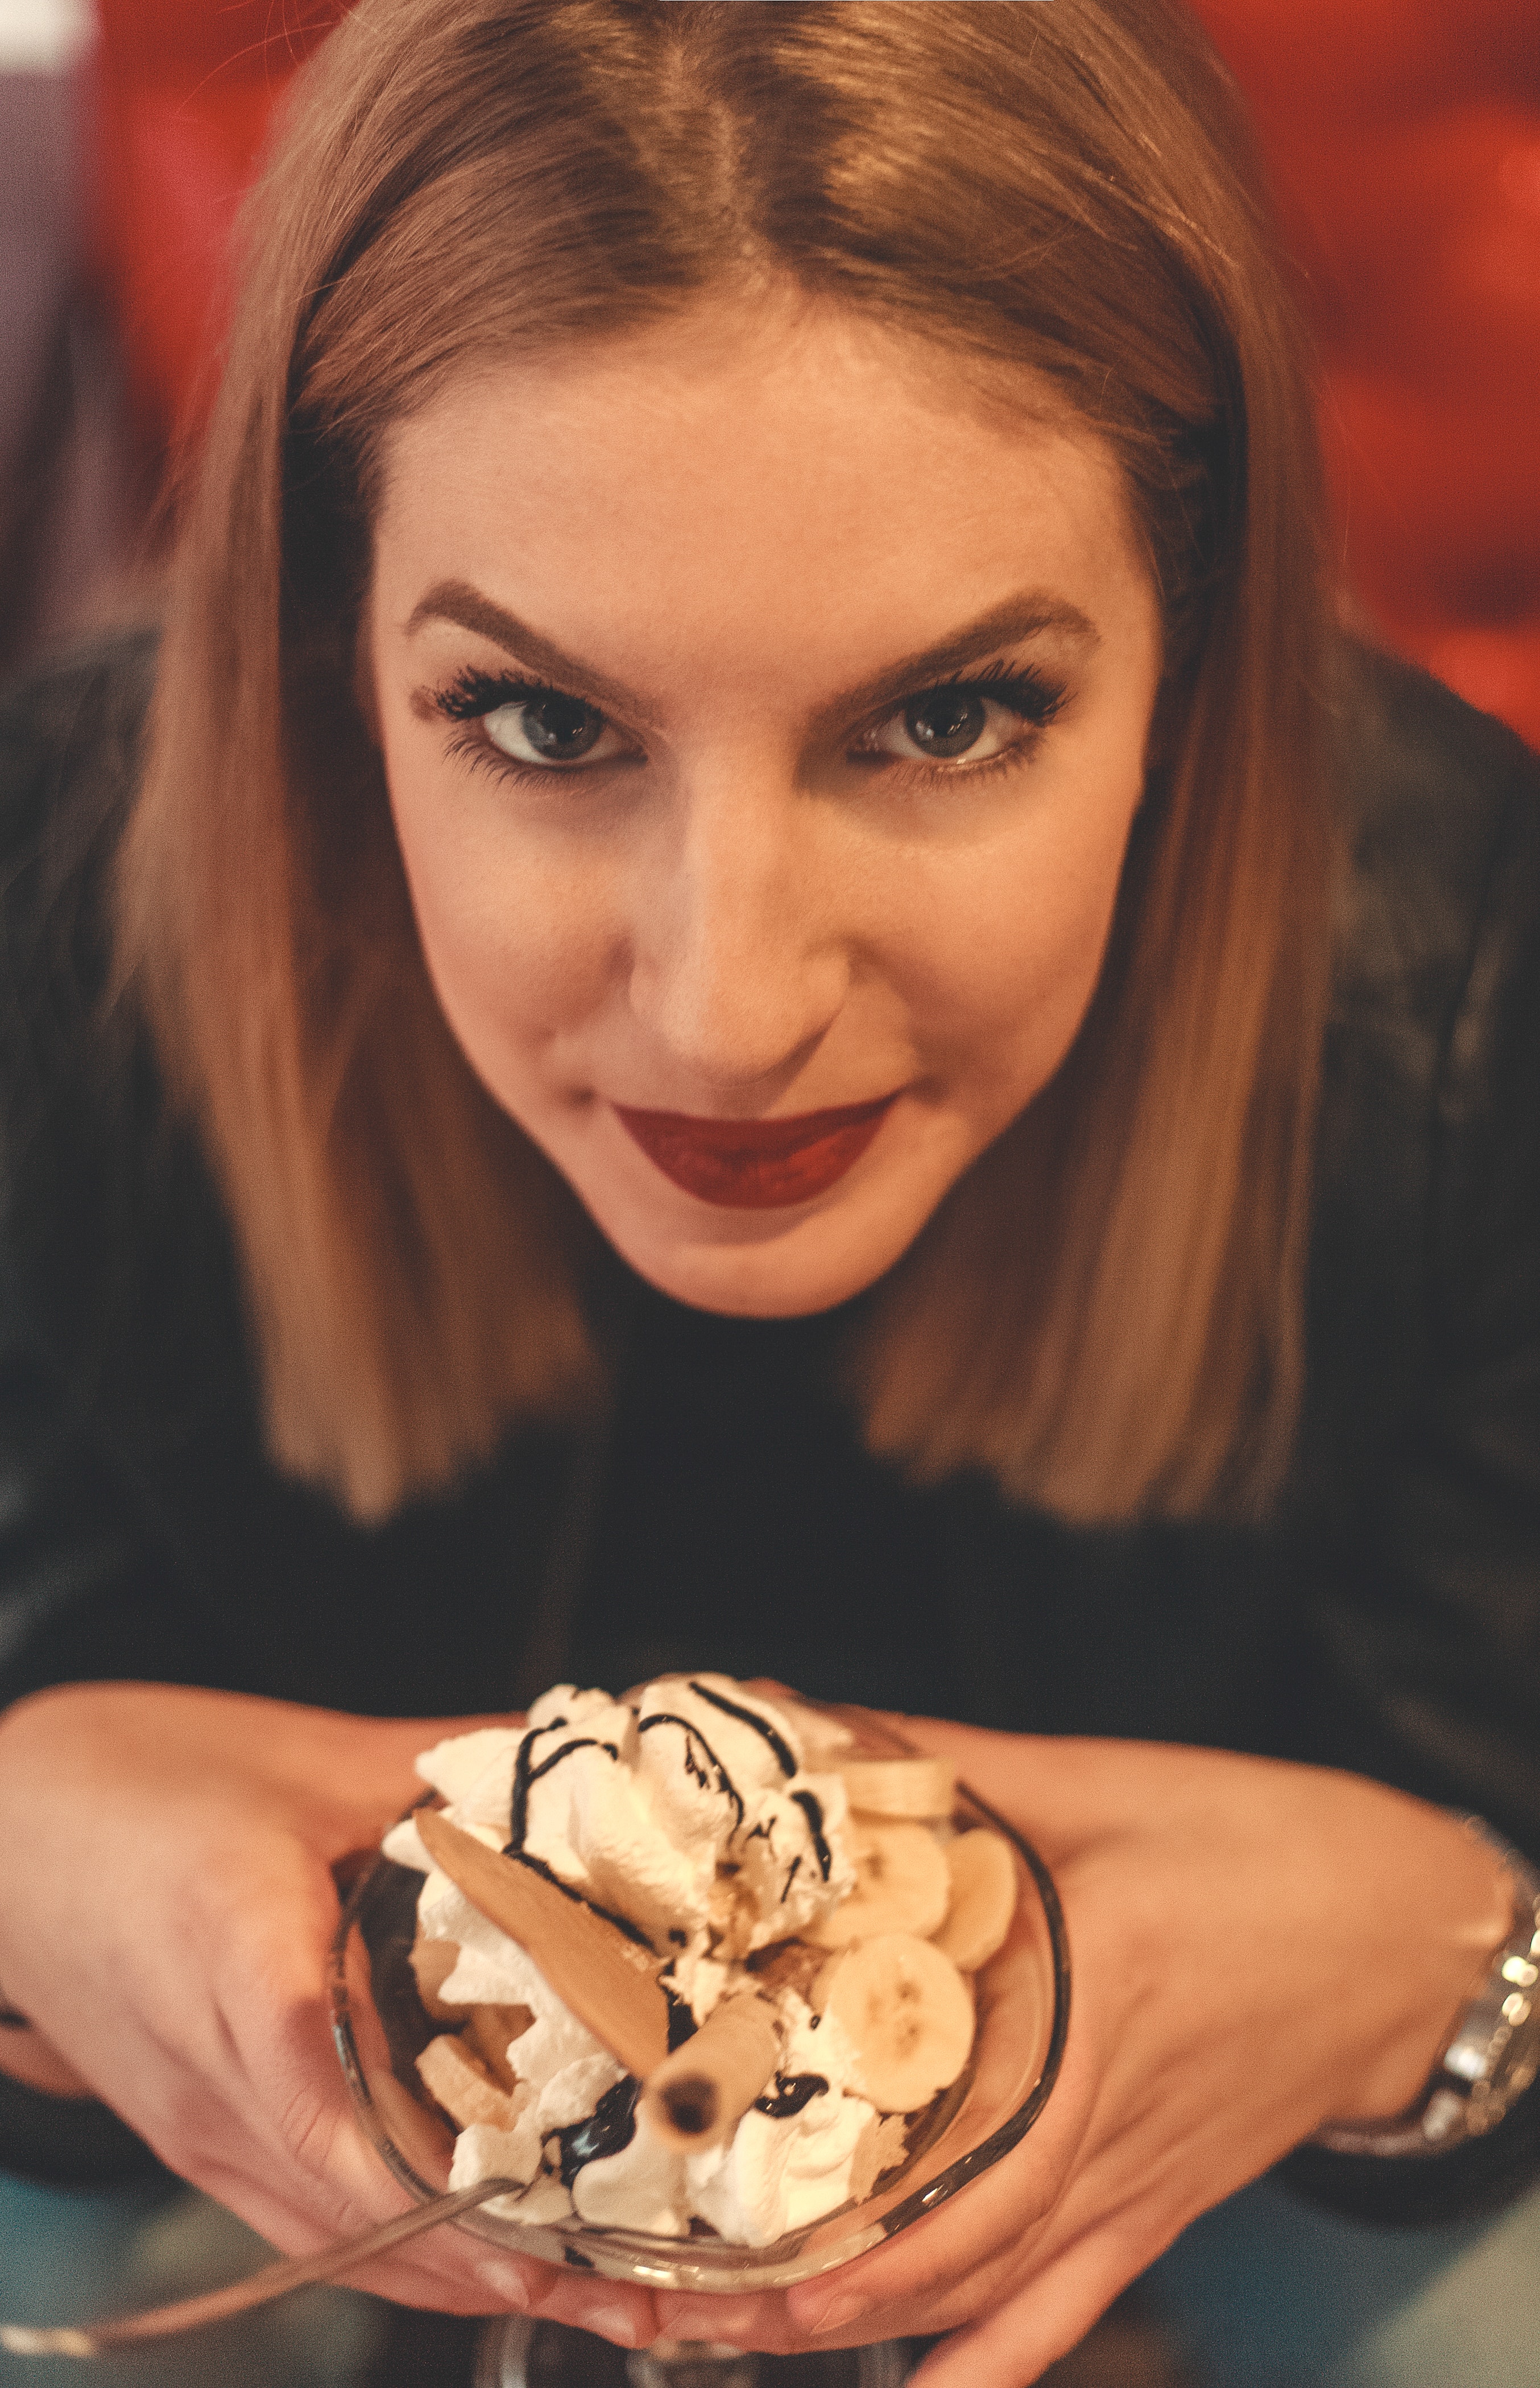 Woman looking on camera holding bowl with ice cream photo